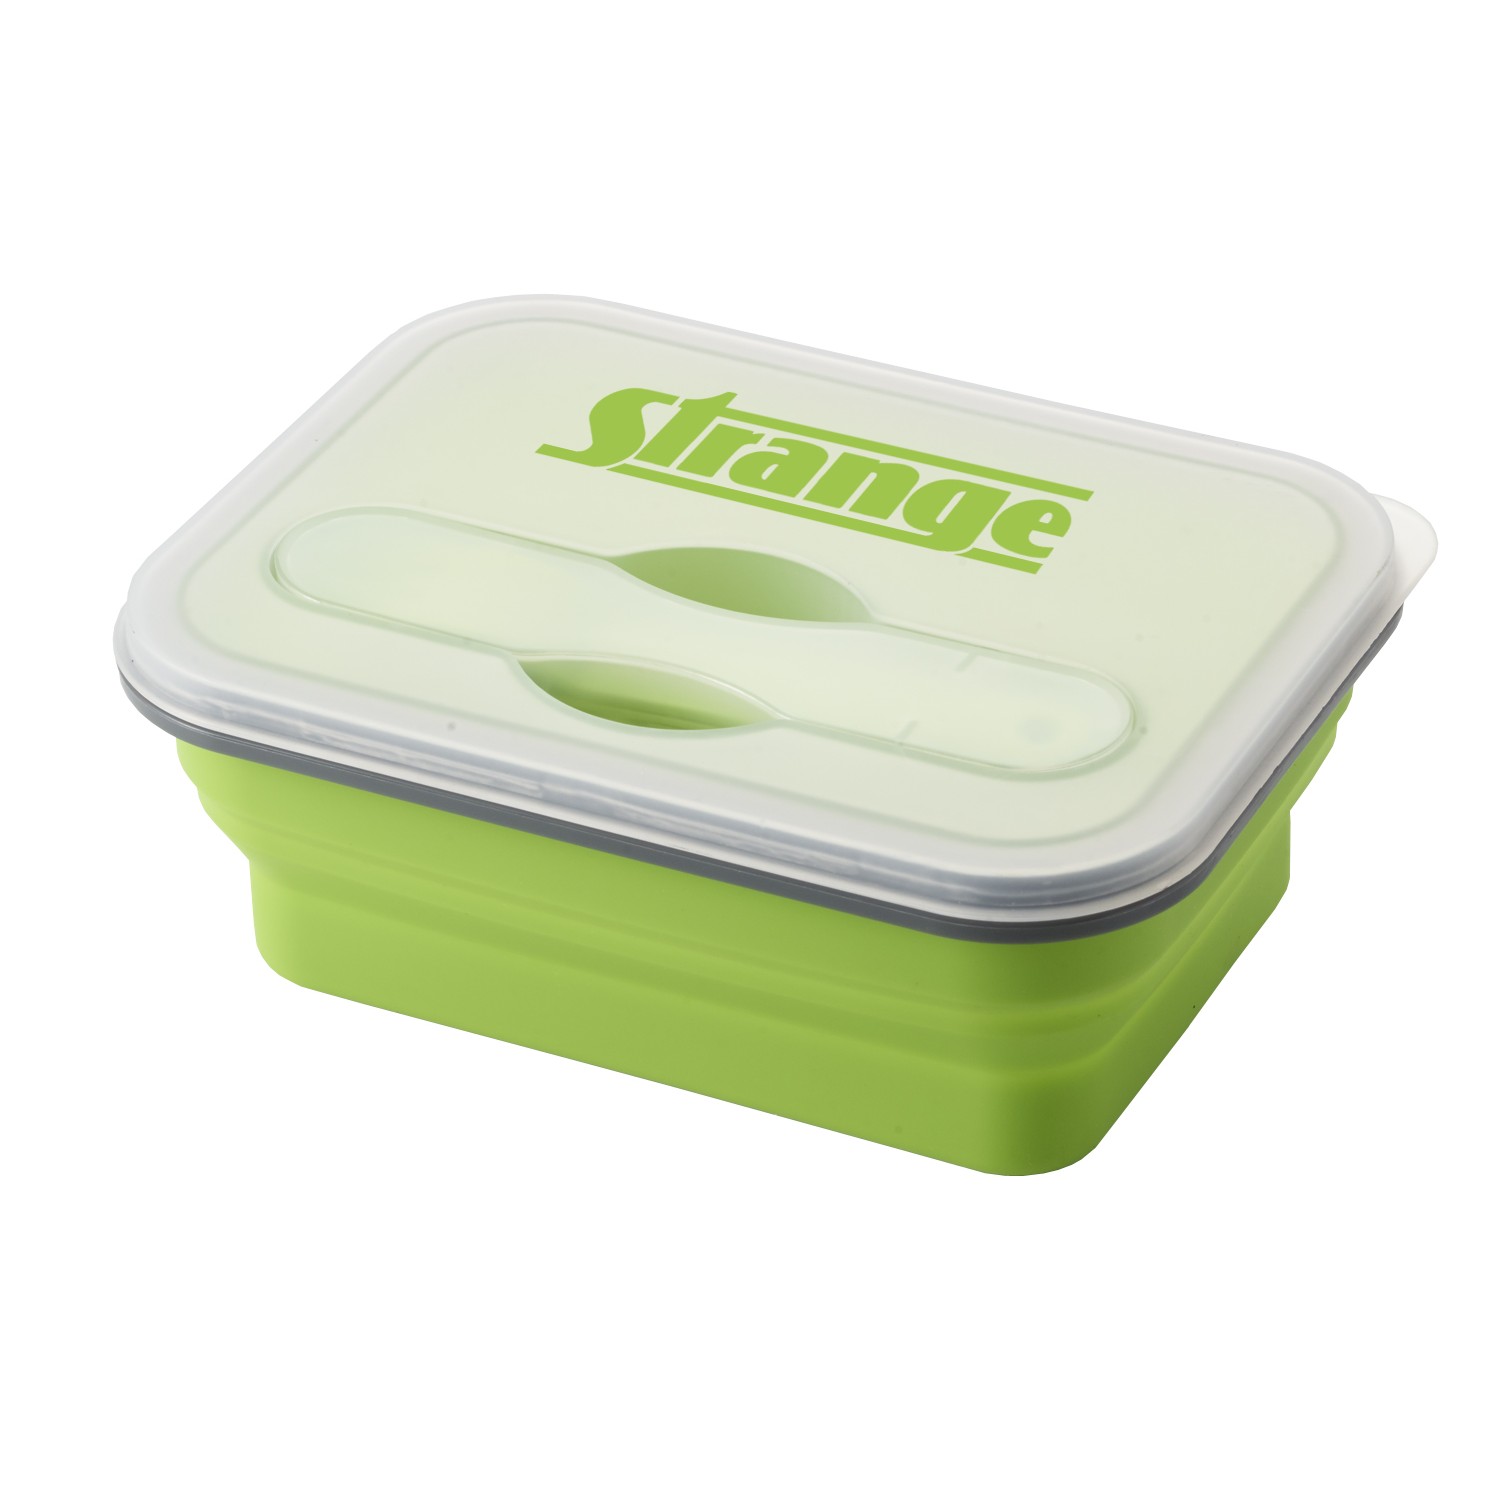 https://evans.brandeditems.com/wp-content/uploads/2021/01/Collapse-It%E2%84%A2-Silicone-Lunch-Container-1336-2.jpeg